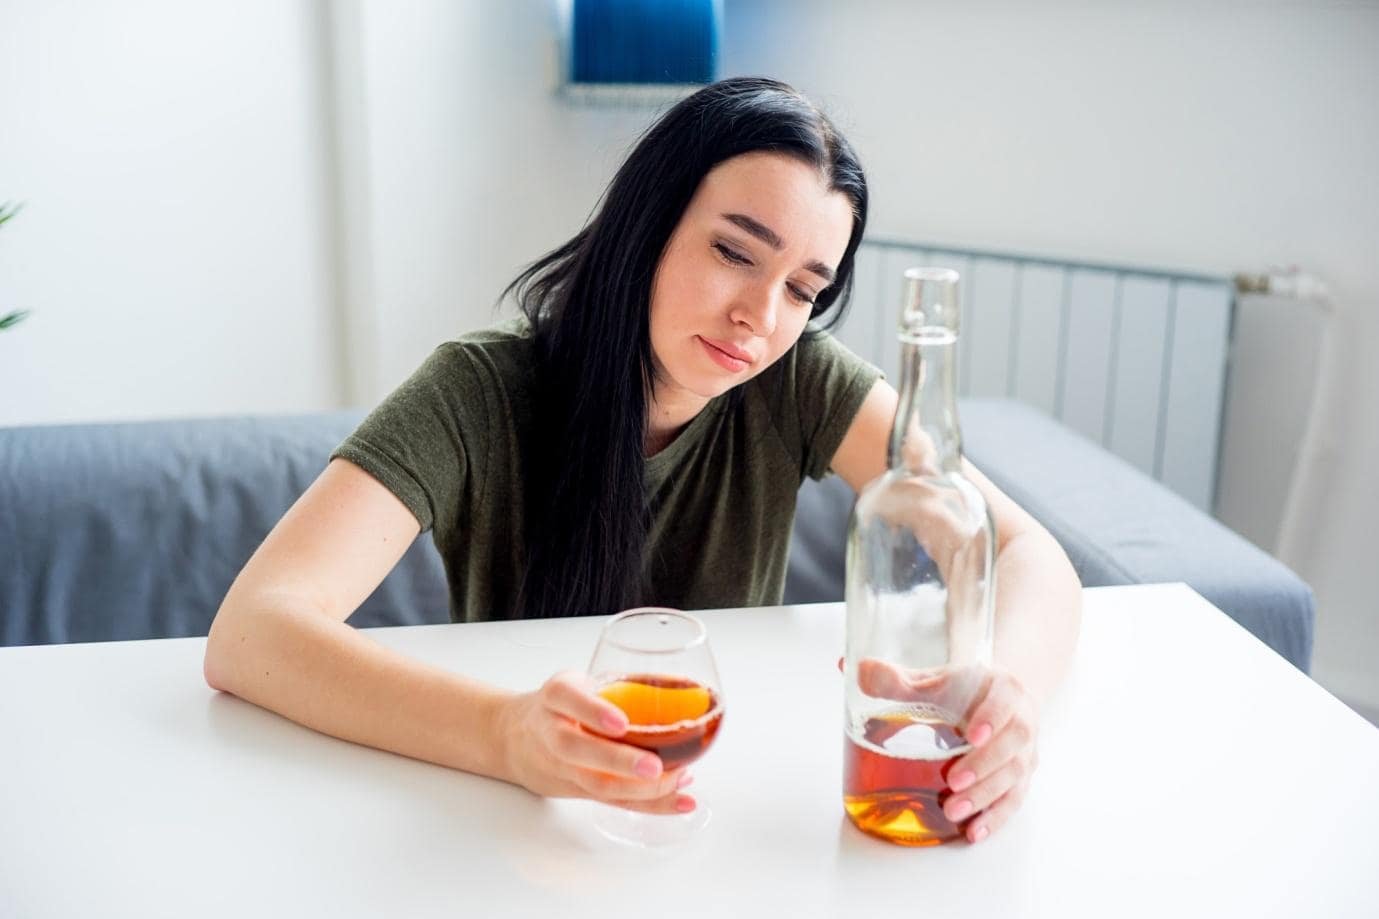 Can You Safely Detox From Alcohol At Home?